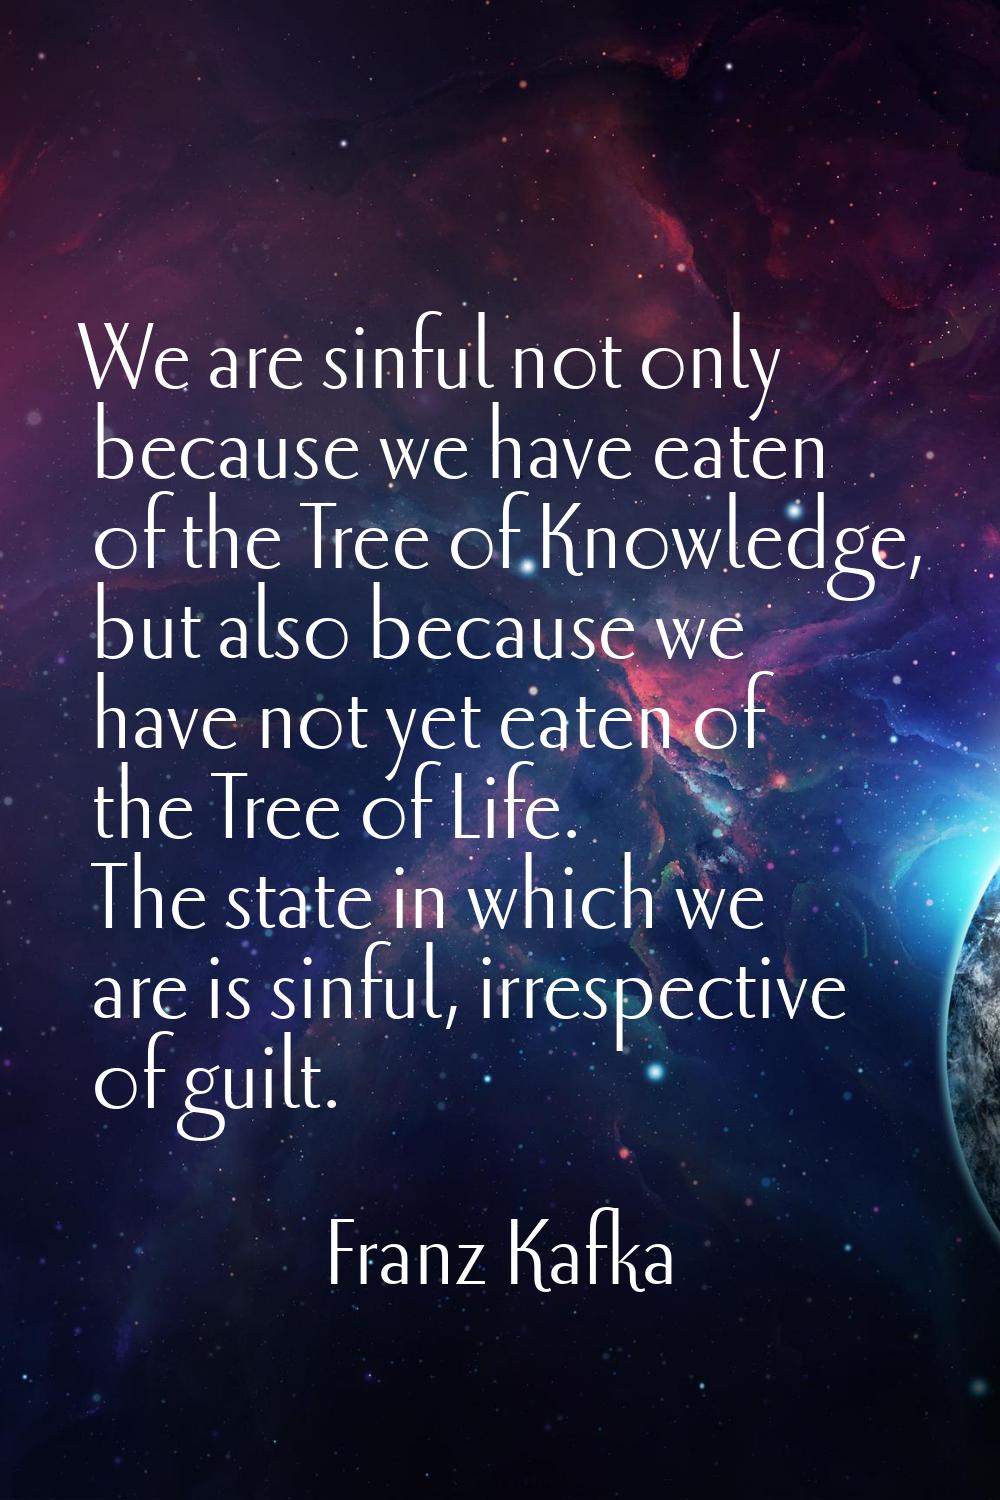 We are sinful not only because we have eaten of the Tree of Knowledge, but also because we have not